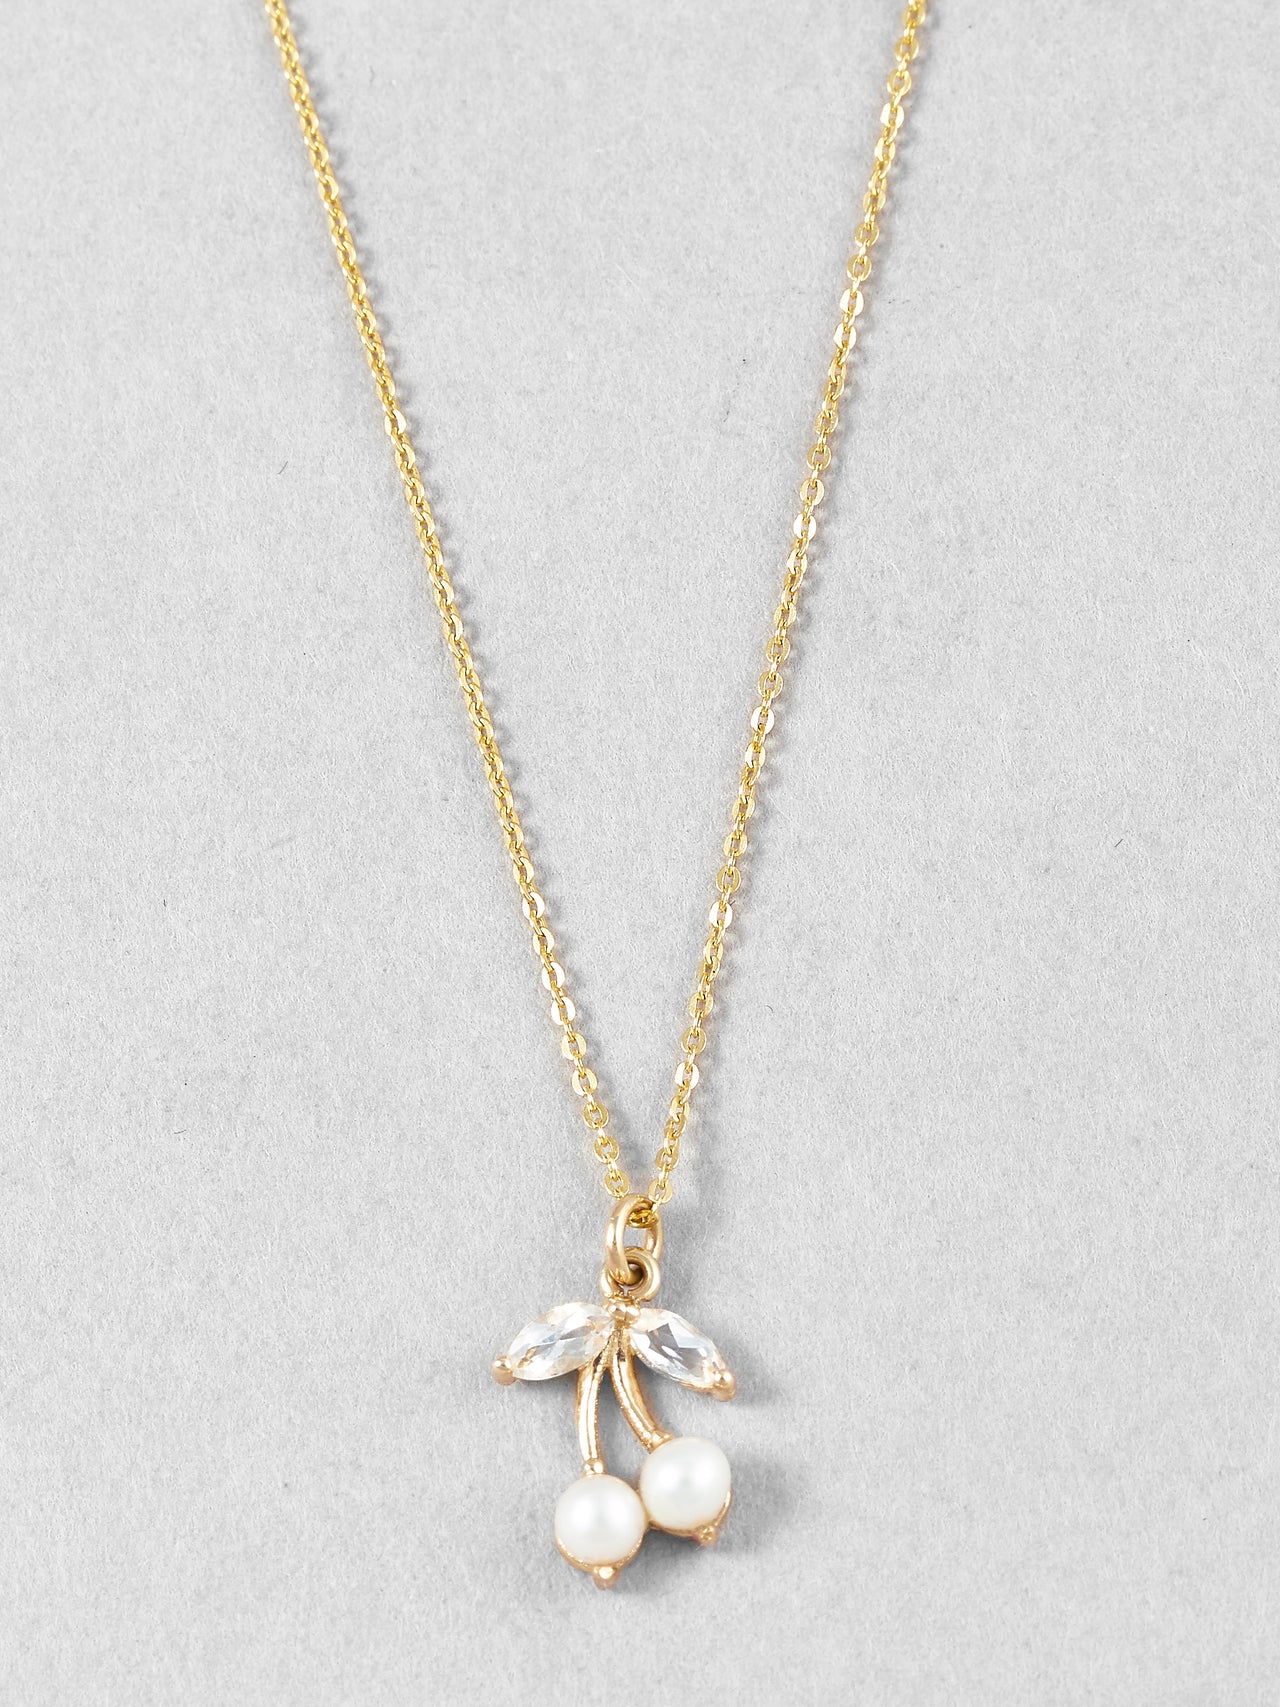 14Kt Yellow Gold Necklace with White Topaz & Pearl Cherry Pendant on gold chain shot on light grey background.